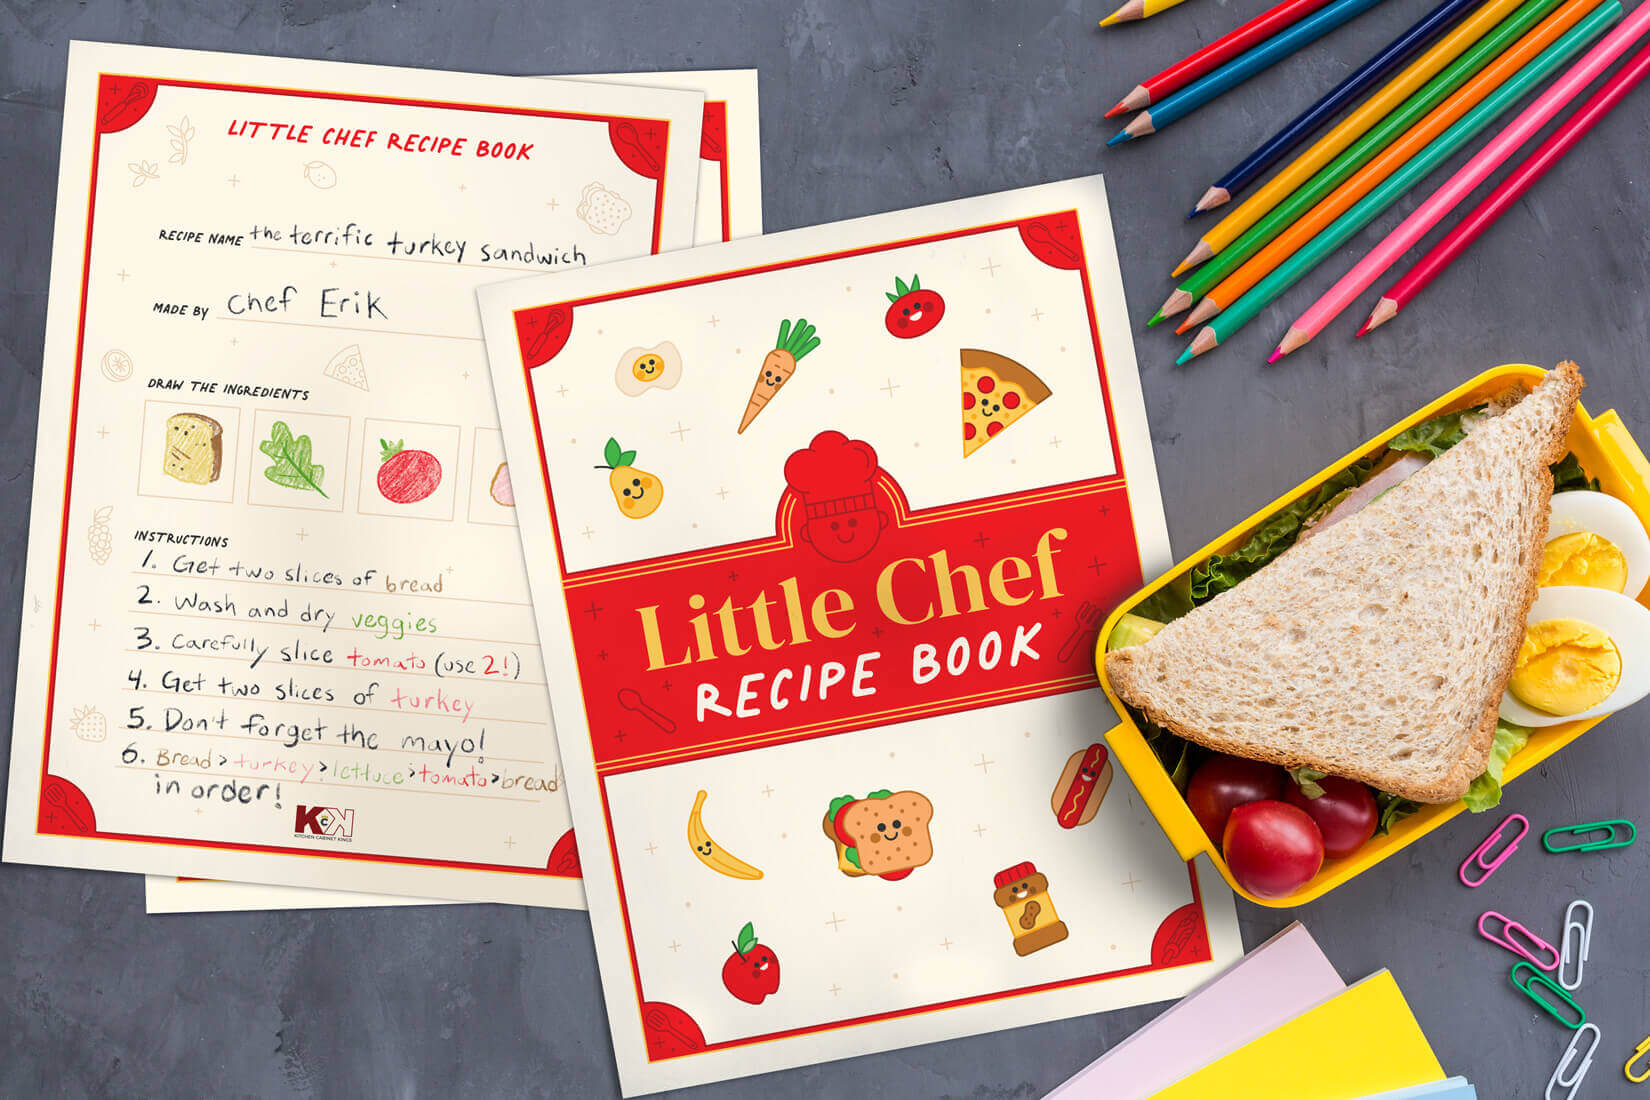 Kitchen Cabinet Kings recipe custom recipe book for cooking with kids at home